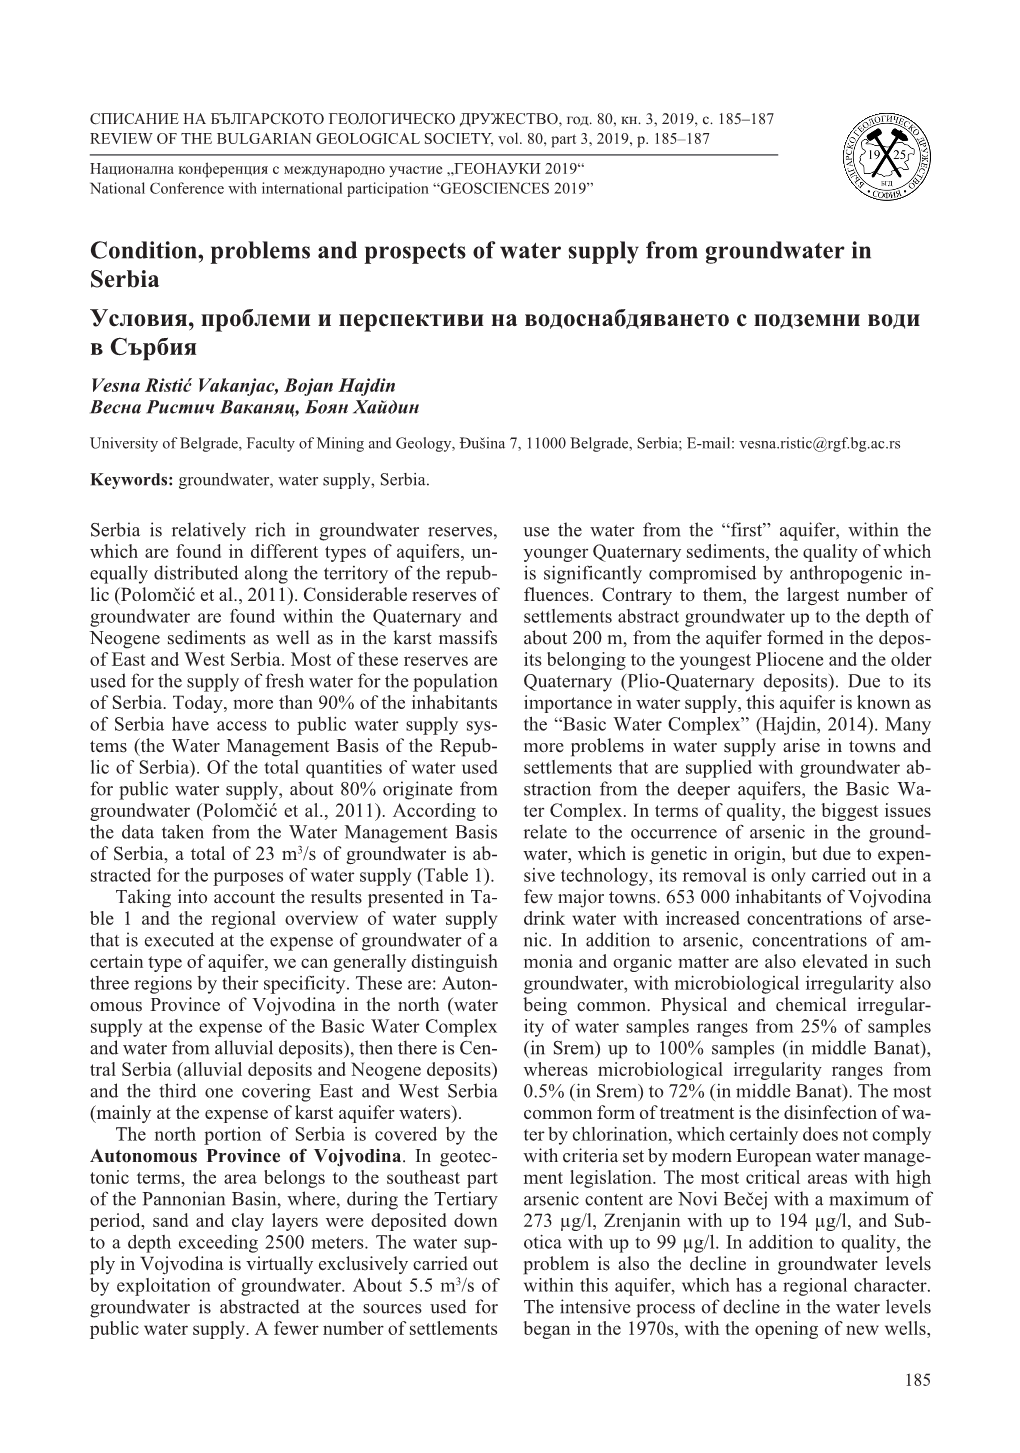 Condition, Problems and Prospects of Water Supply from Groundwater In